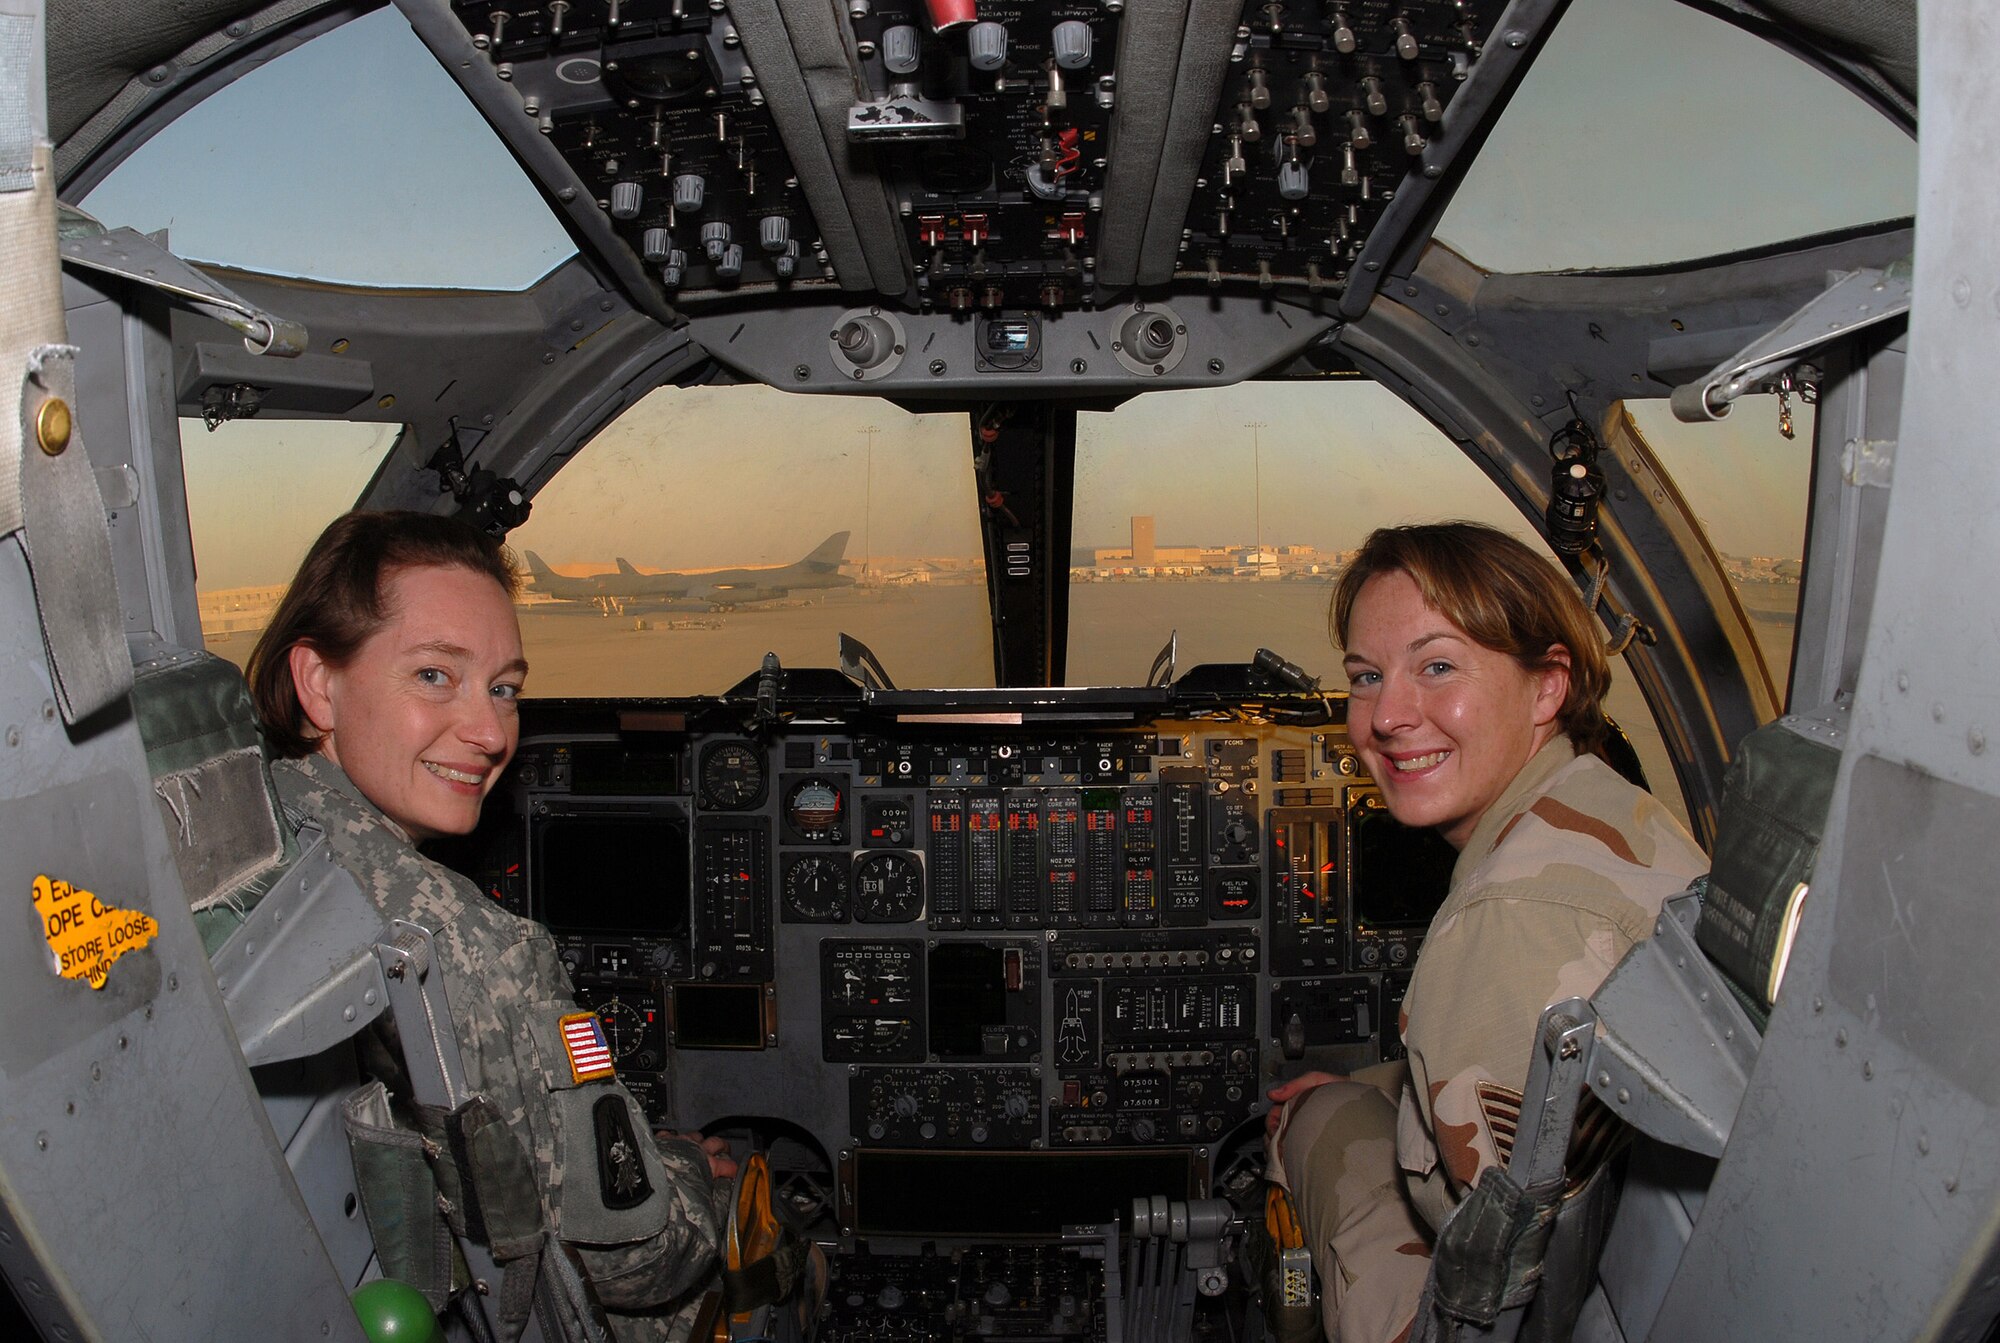 SOUTHWEST ASIA - Tech. Sgt. Jenny Dunn, 379th Expeditionary Maintenance Squadron, weapons system technician, gives her sister, U.S. Army Maj. Melinda Lampert, a tour of a B-1B Lancer Bomber at a Southwest Asia air base Dec. 11. The sisters, both deployed to the Southwest Asia theater, met for a brief visit. Major Lampert is visiting her sister on a four-day pass from an Army Base in Iraq. Major Lampert is a physician's assistant with the Minnesota Army National Guard. Sergeant Dunn's home station is Ellsworth Air Force Base, S. D. The sister's hometown is Bowlus, Minn. (U. S. Air Force photo/Staff Sgt. Douglas Olsen)